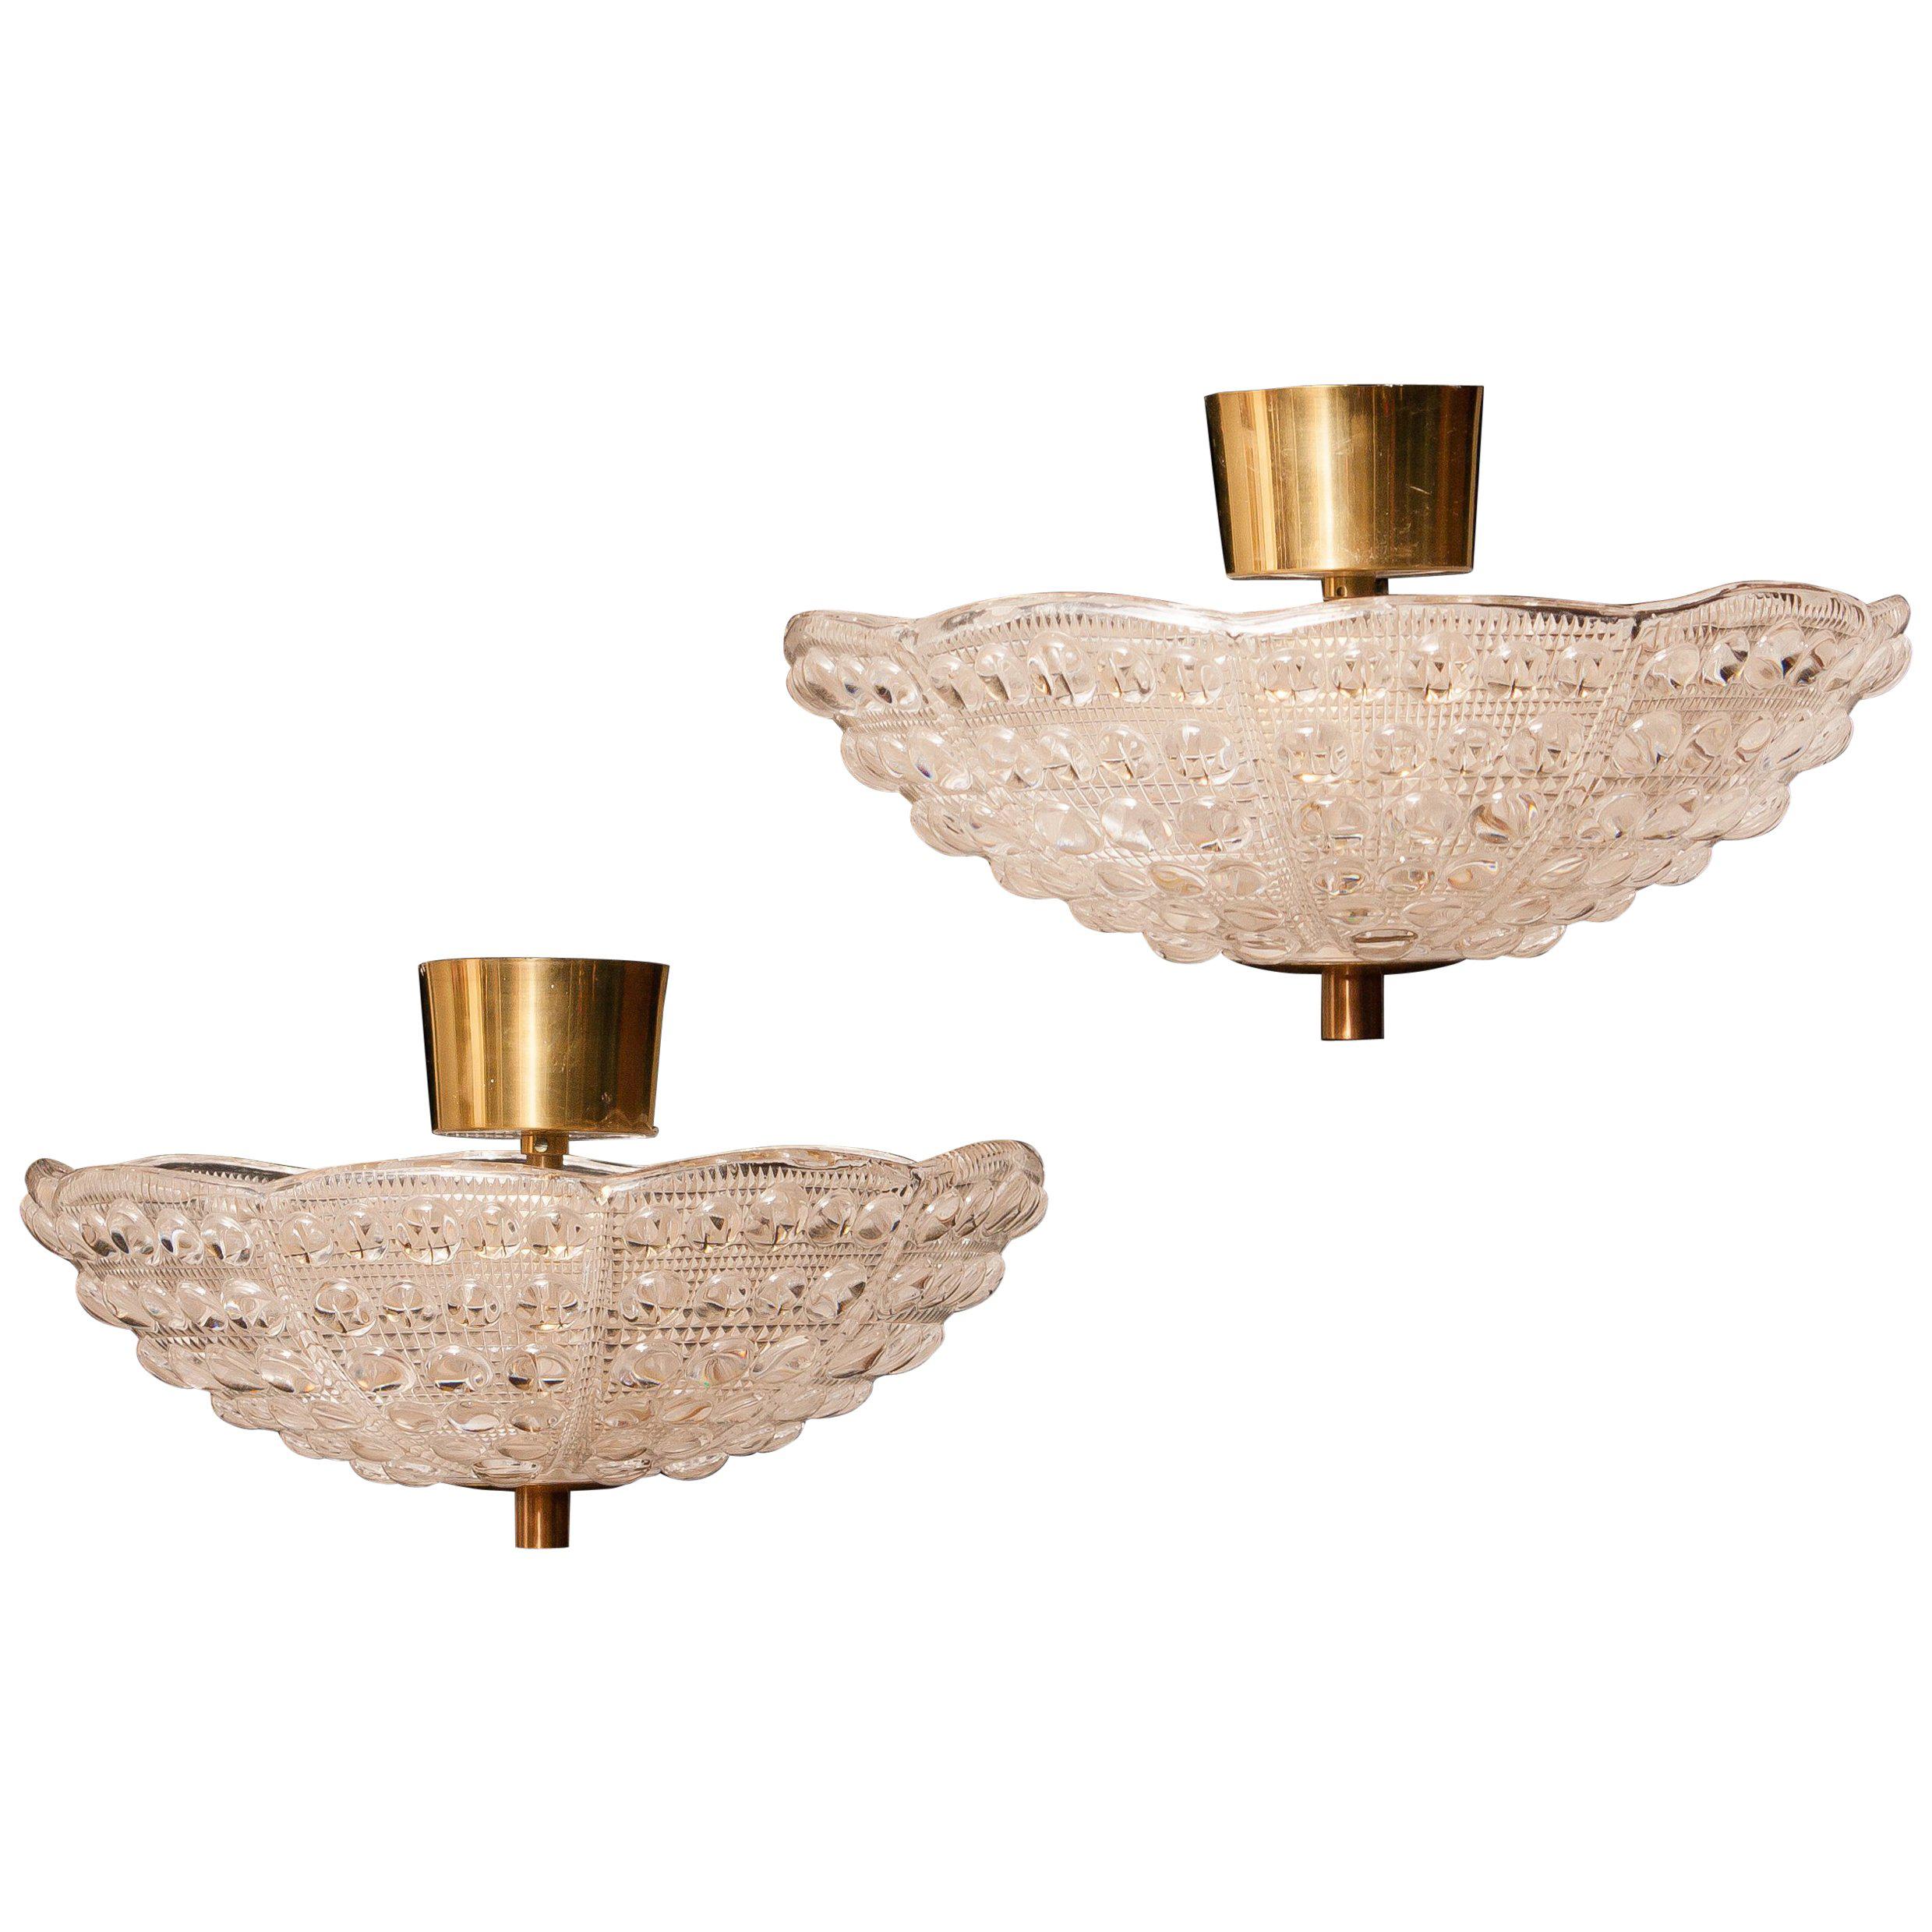 Beautiful pair of ceiling lights designed by Carl Fagerlund for Orrefors, Sweden.
These pendants are made of crystal glass and brass.
They are in wonderful working condition.
Period, 1960s.
Dimensions: H 20 cm, Ø 36 cm.